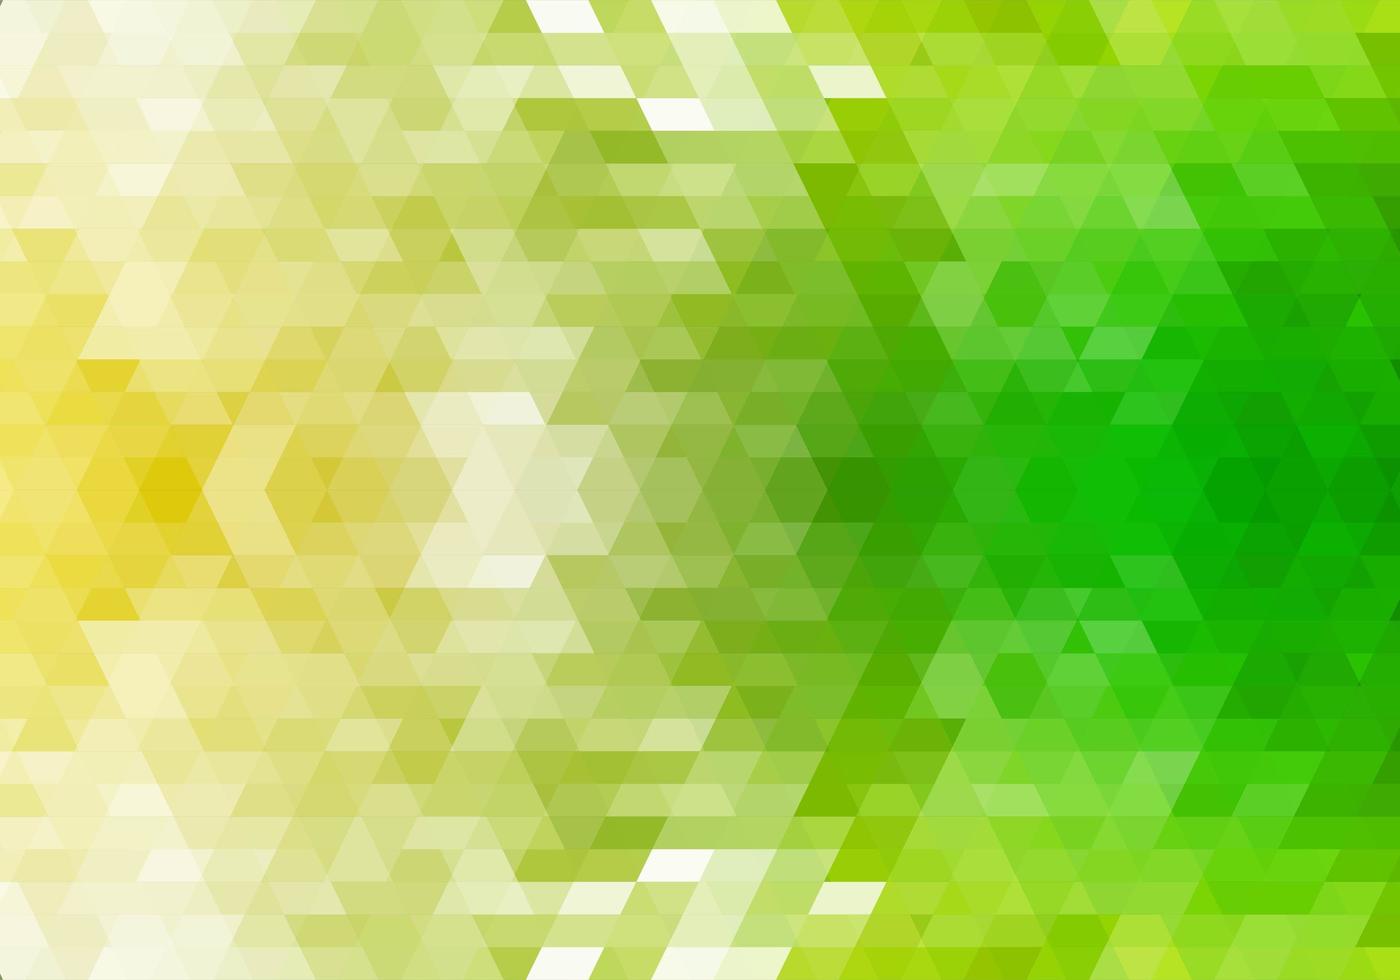 Abstract green geometric shapes background vector